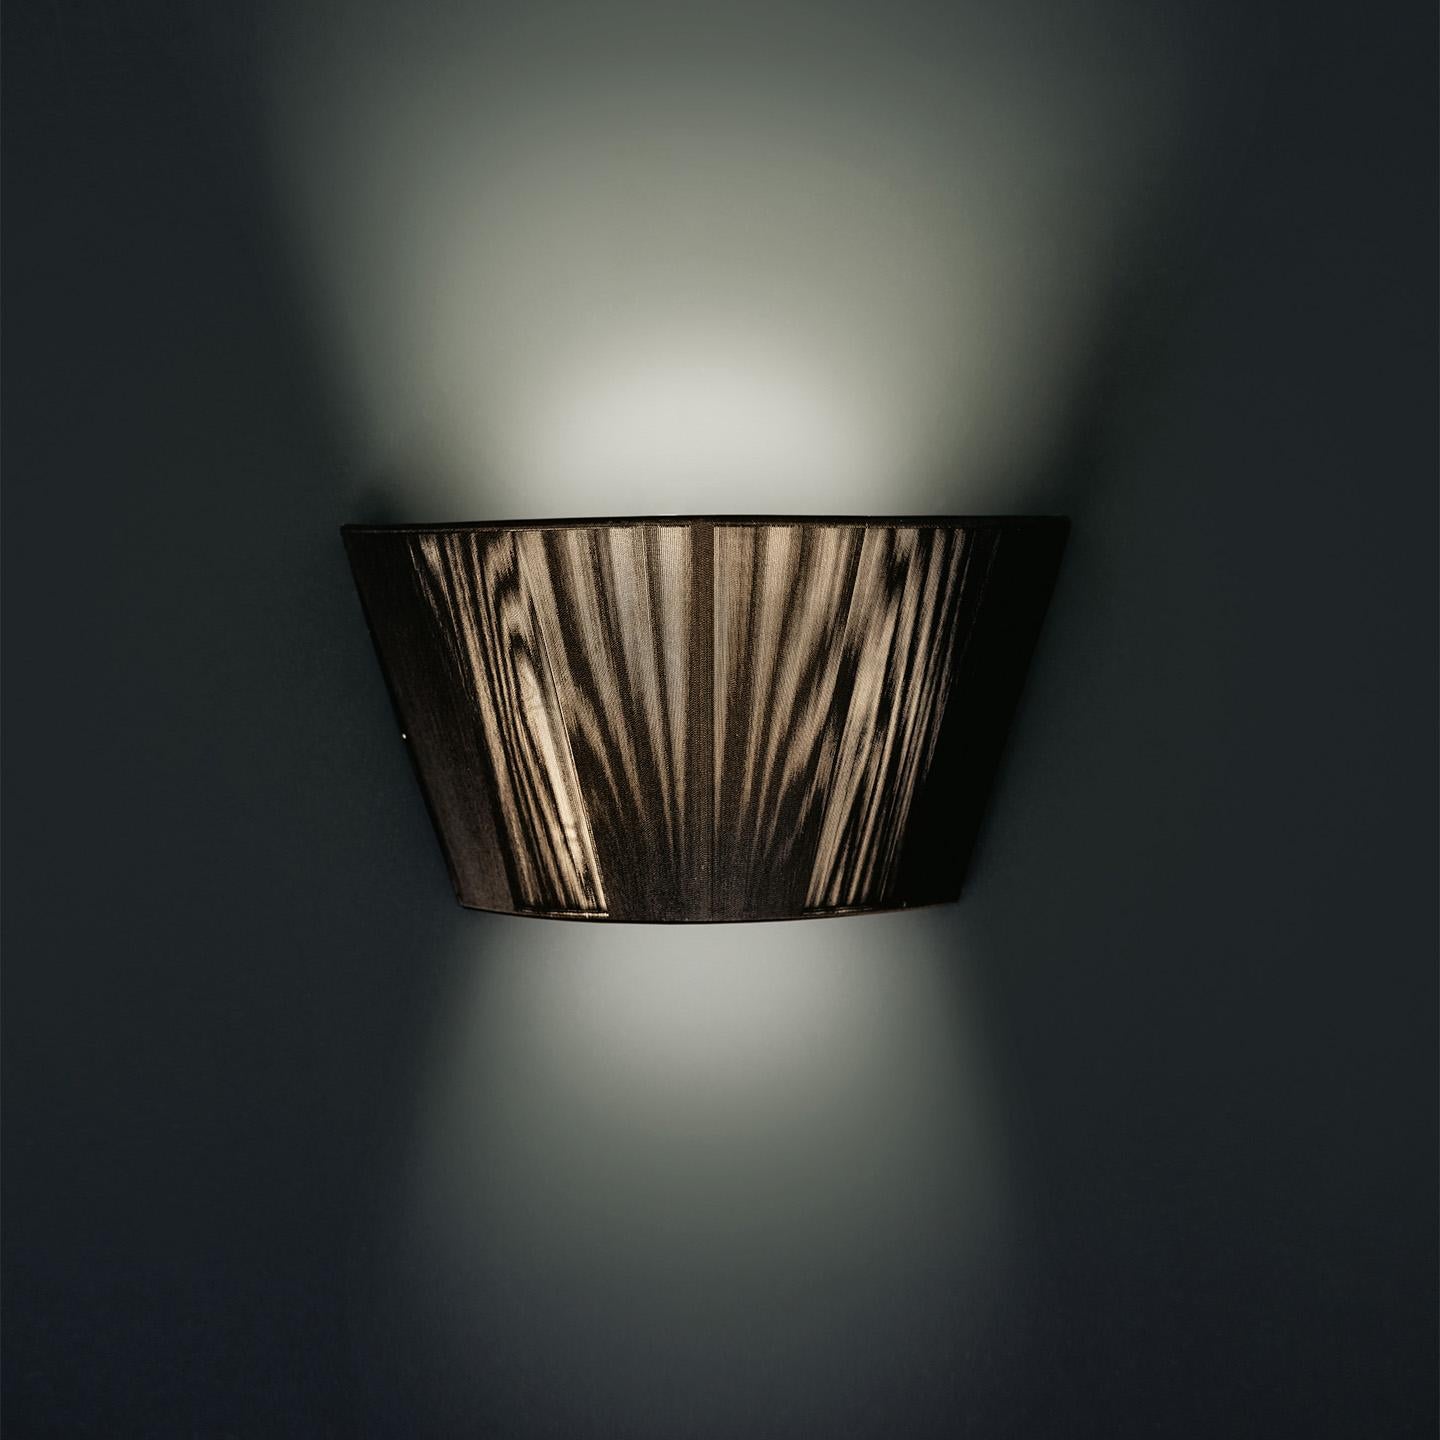 The Lilith wall lamp is an elegant lighting solution with a stunning light effect created by threading thin string in a consistent pattern across the shade. As you engage it from different viewpoints, the light pattern shimmers and changes. The